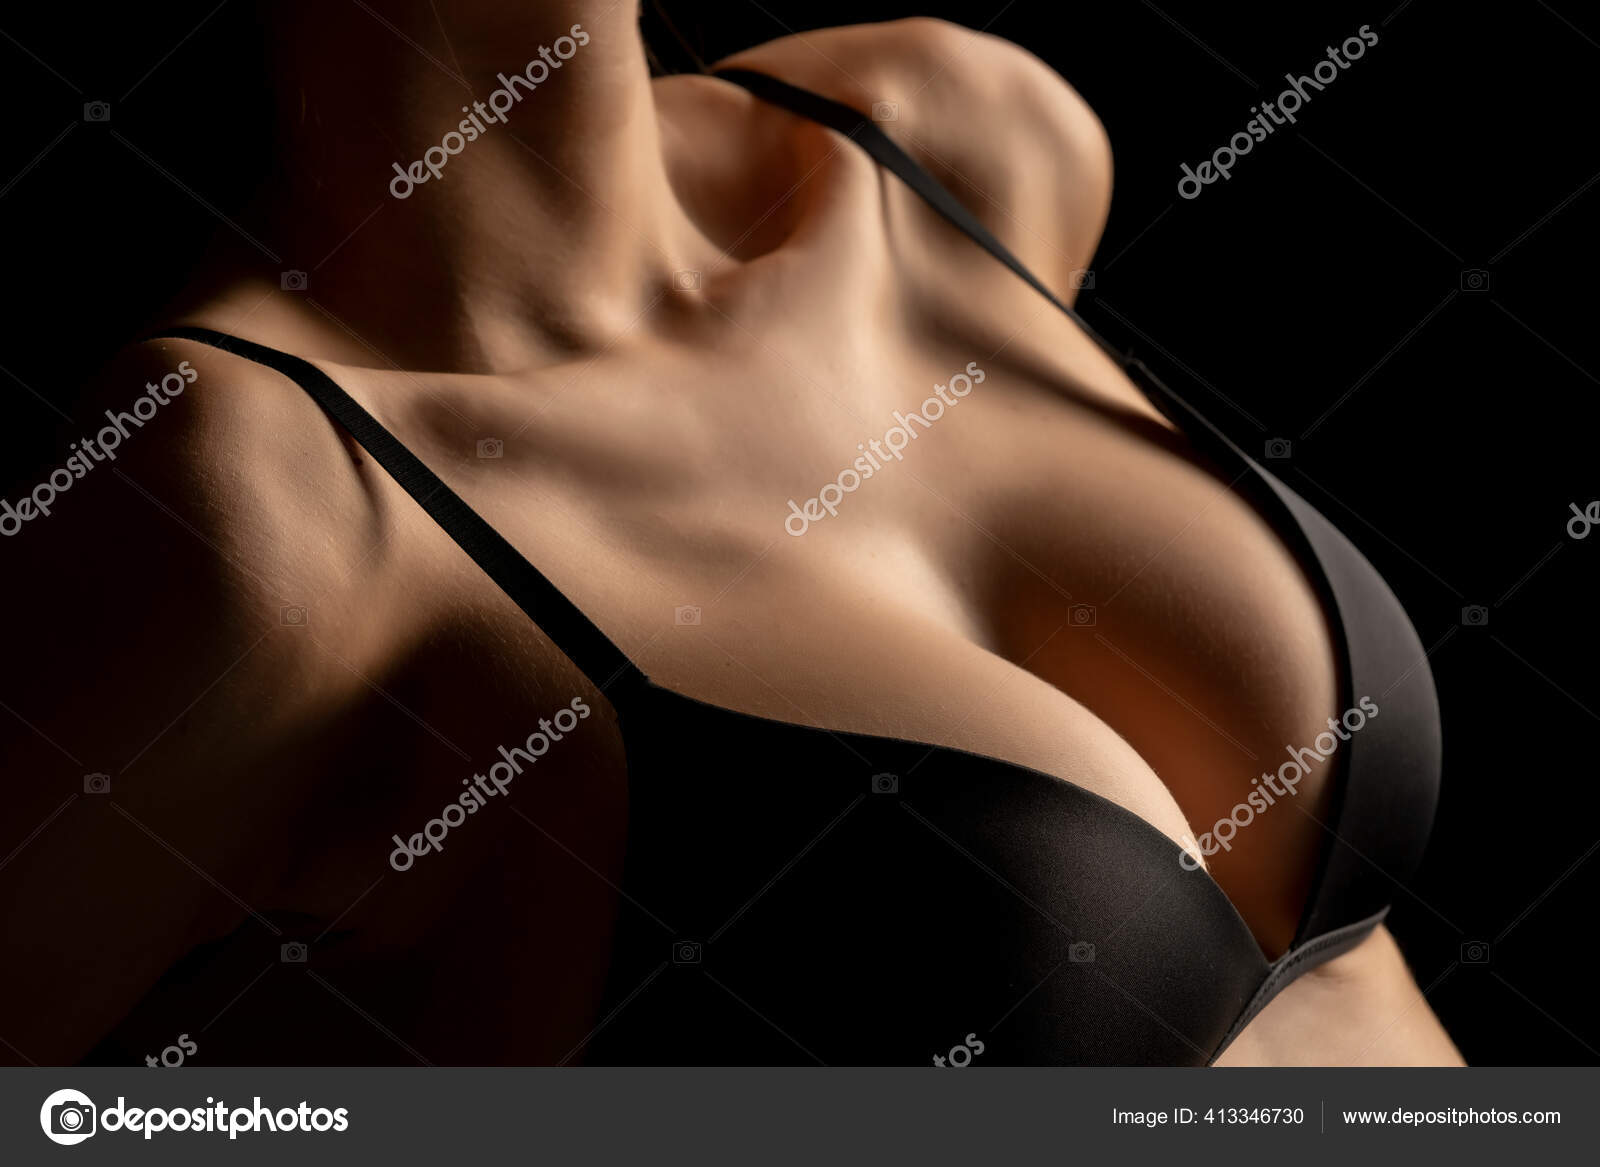 Woman Perfect Breasts Black Bra Black Background Stock Photo by